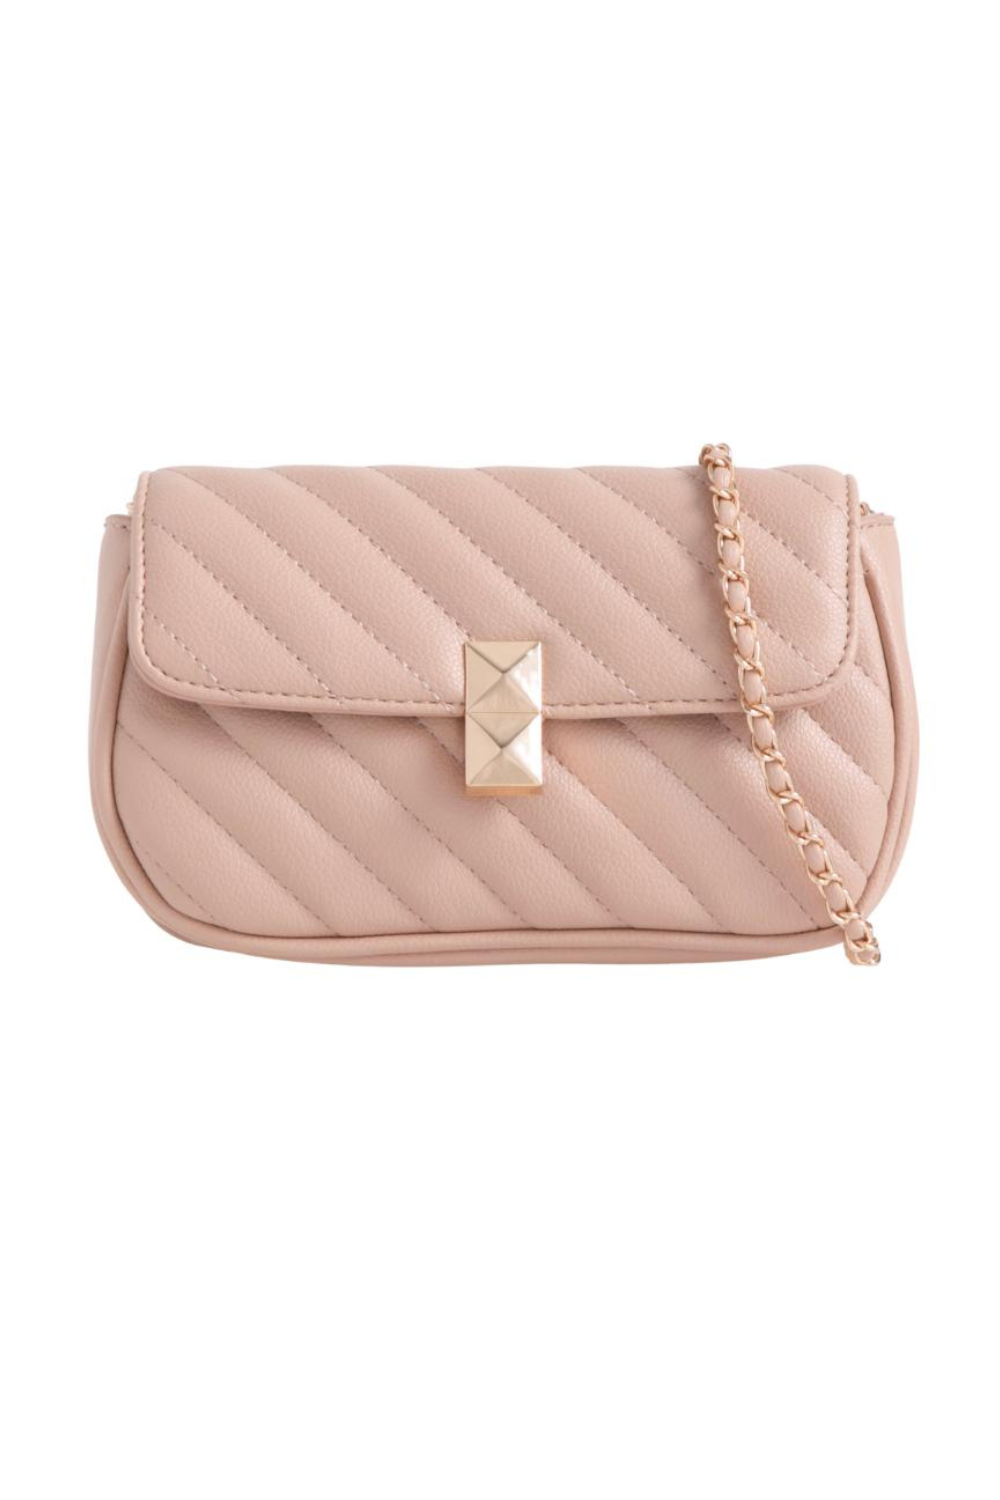 WAVE SHOULDER BAG WITH STITCHING AND CHAIN DETAIL IN NUDE FAUX LEATHER